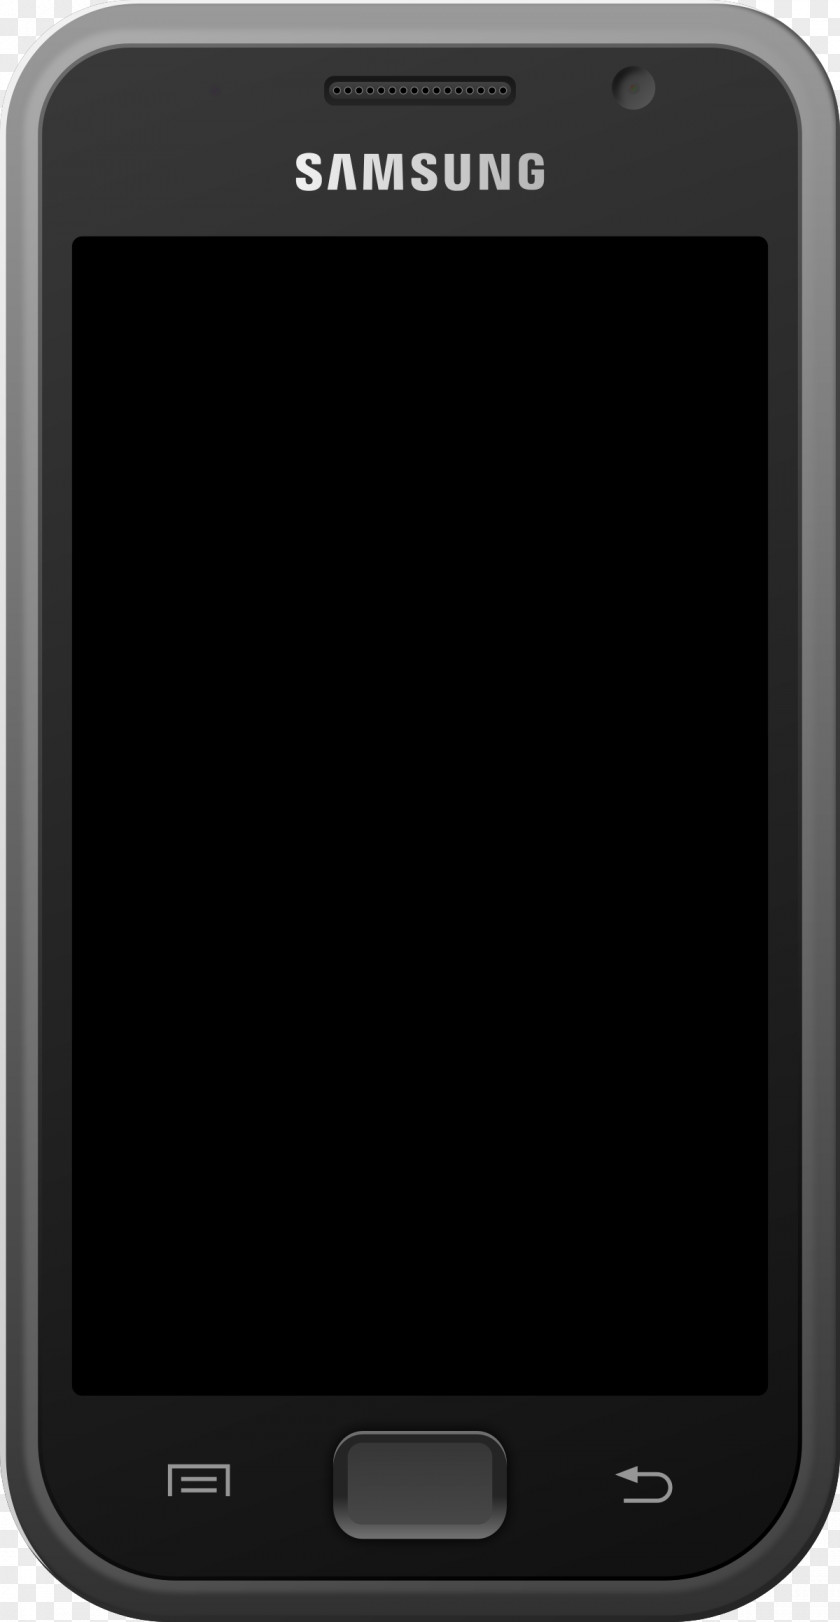 Samsung Galaxy S Plus Duos 3 Android Smartphone PNG